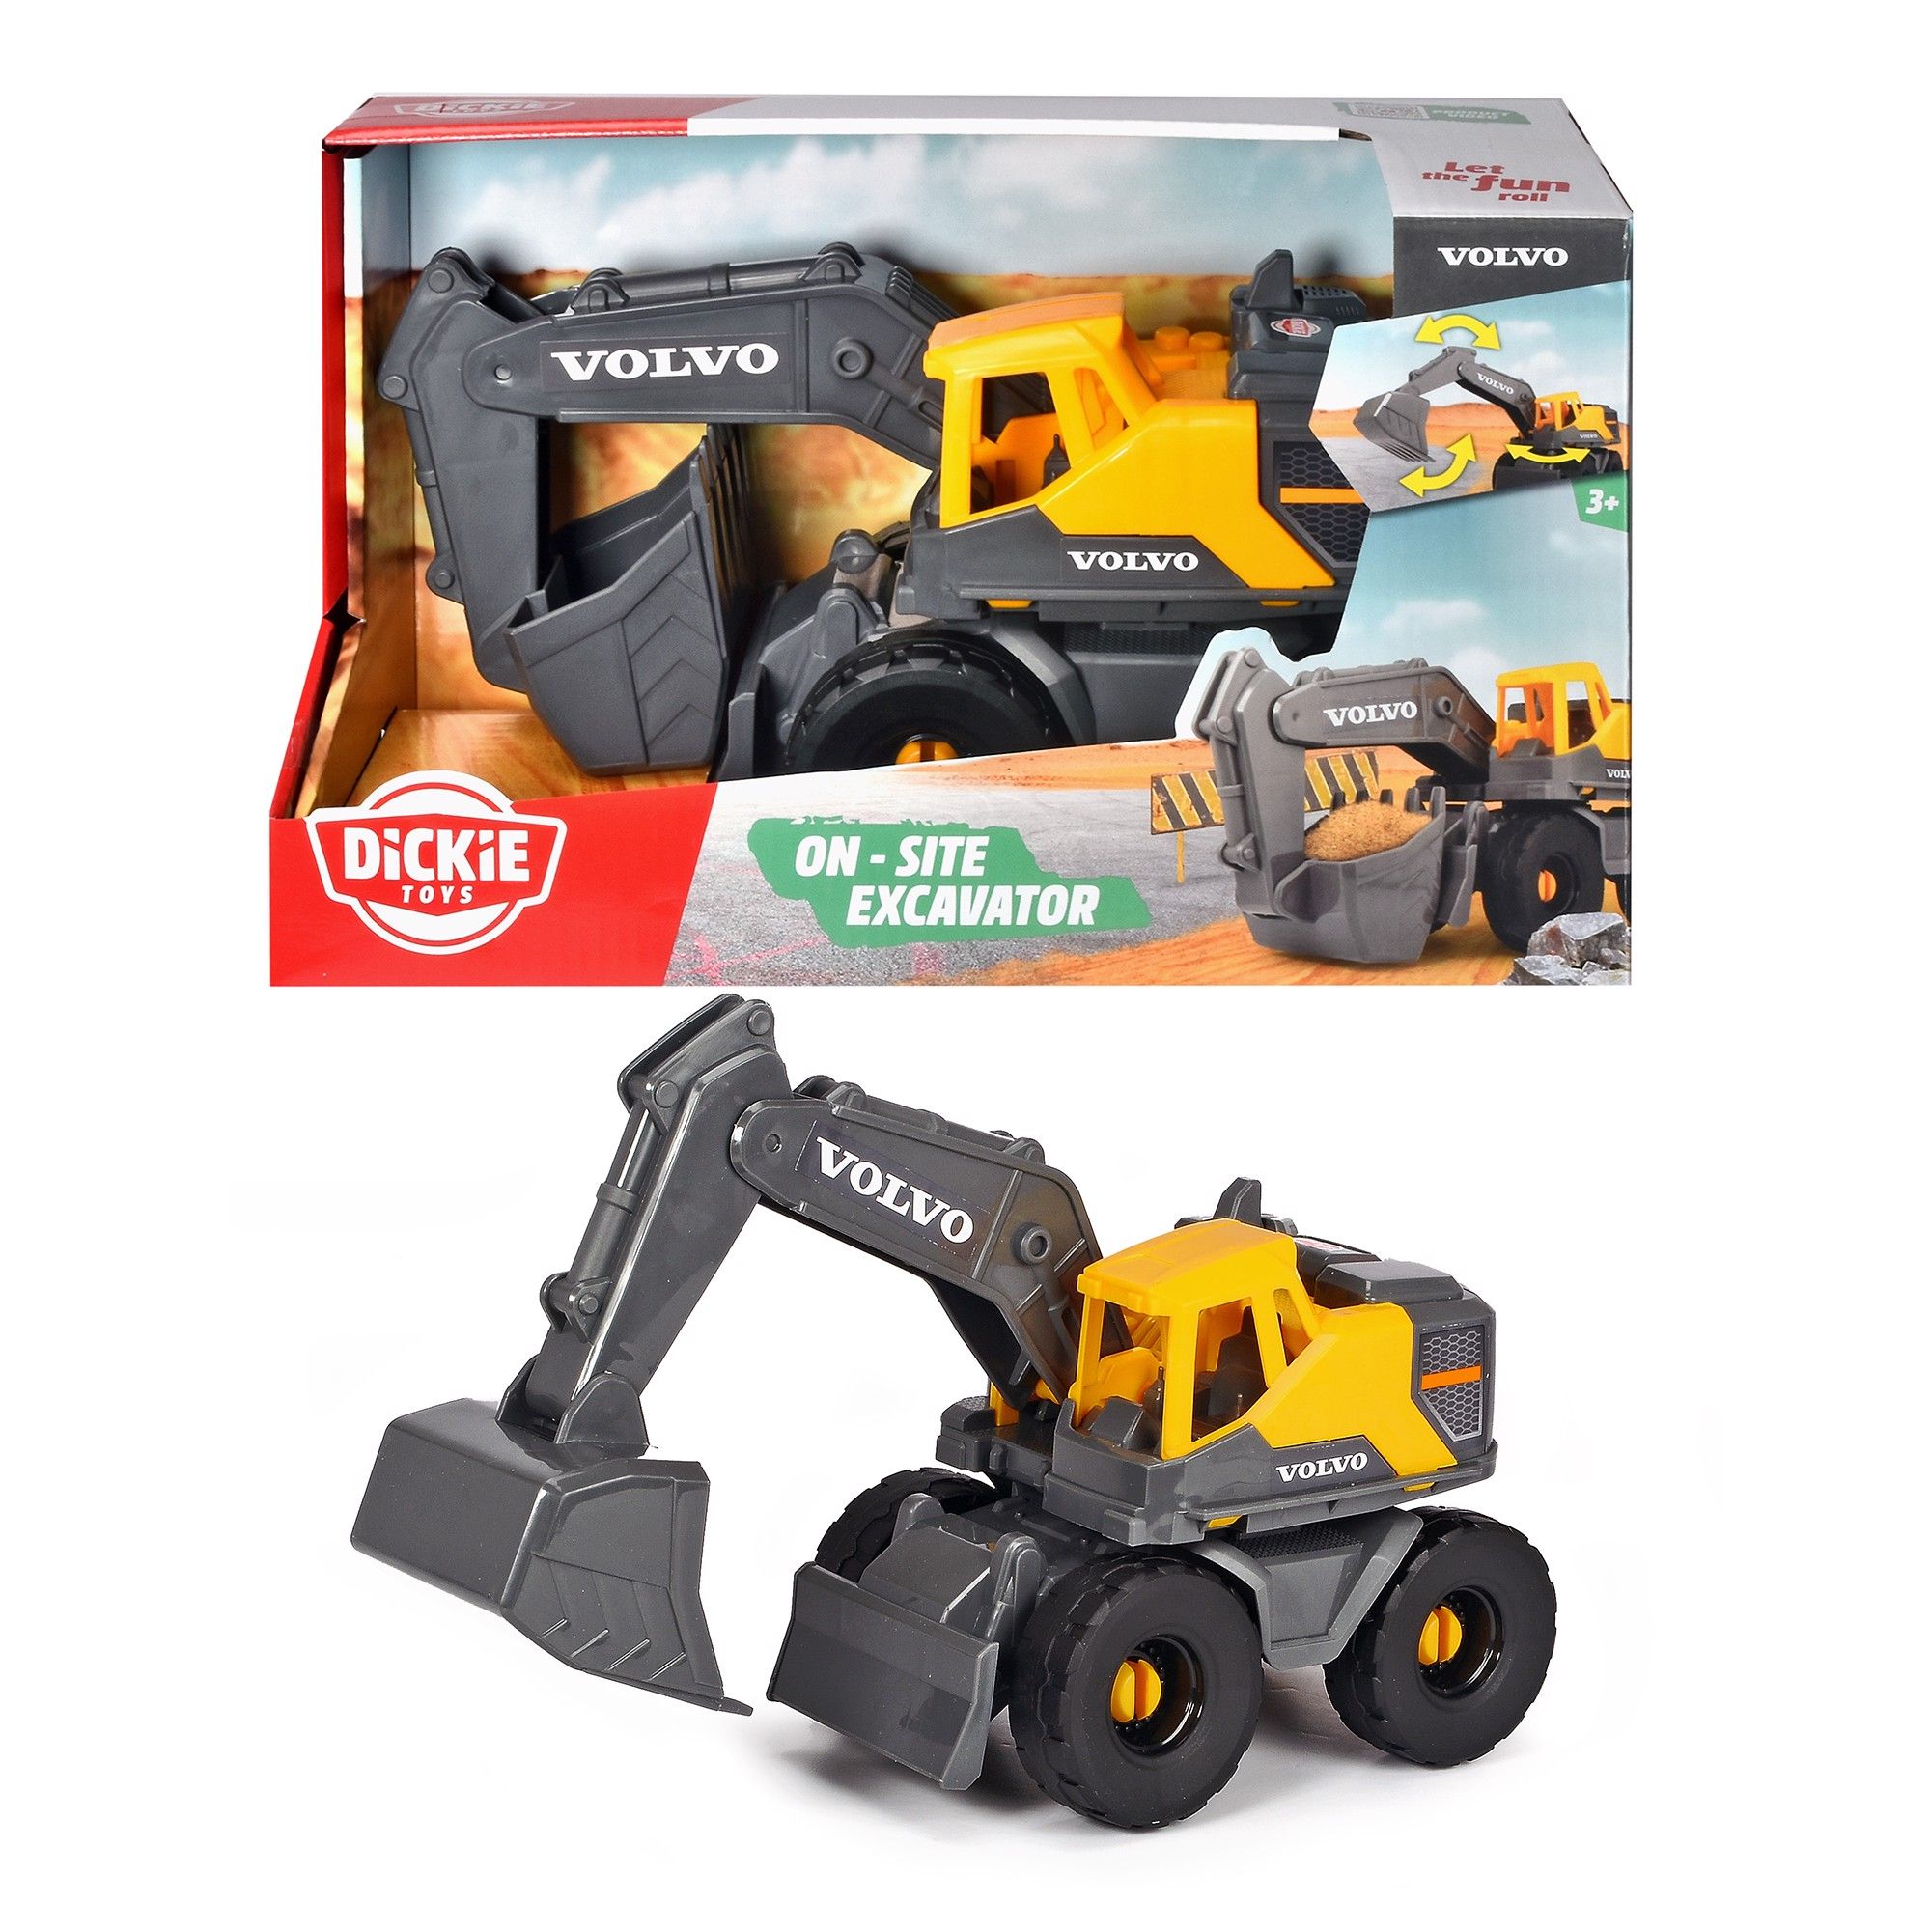  203724003 Đồ Chơi Xe Xây Dựng DICKIE TOYS Volvo On-site Excavator 